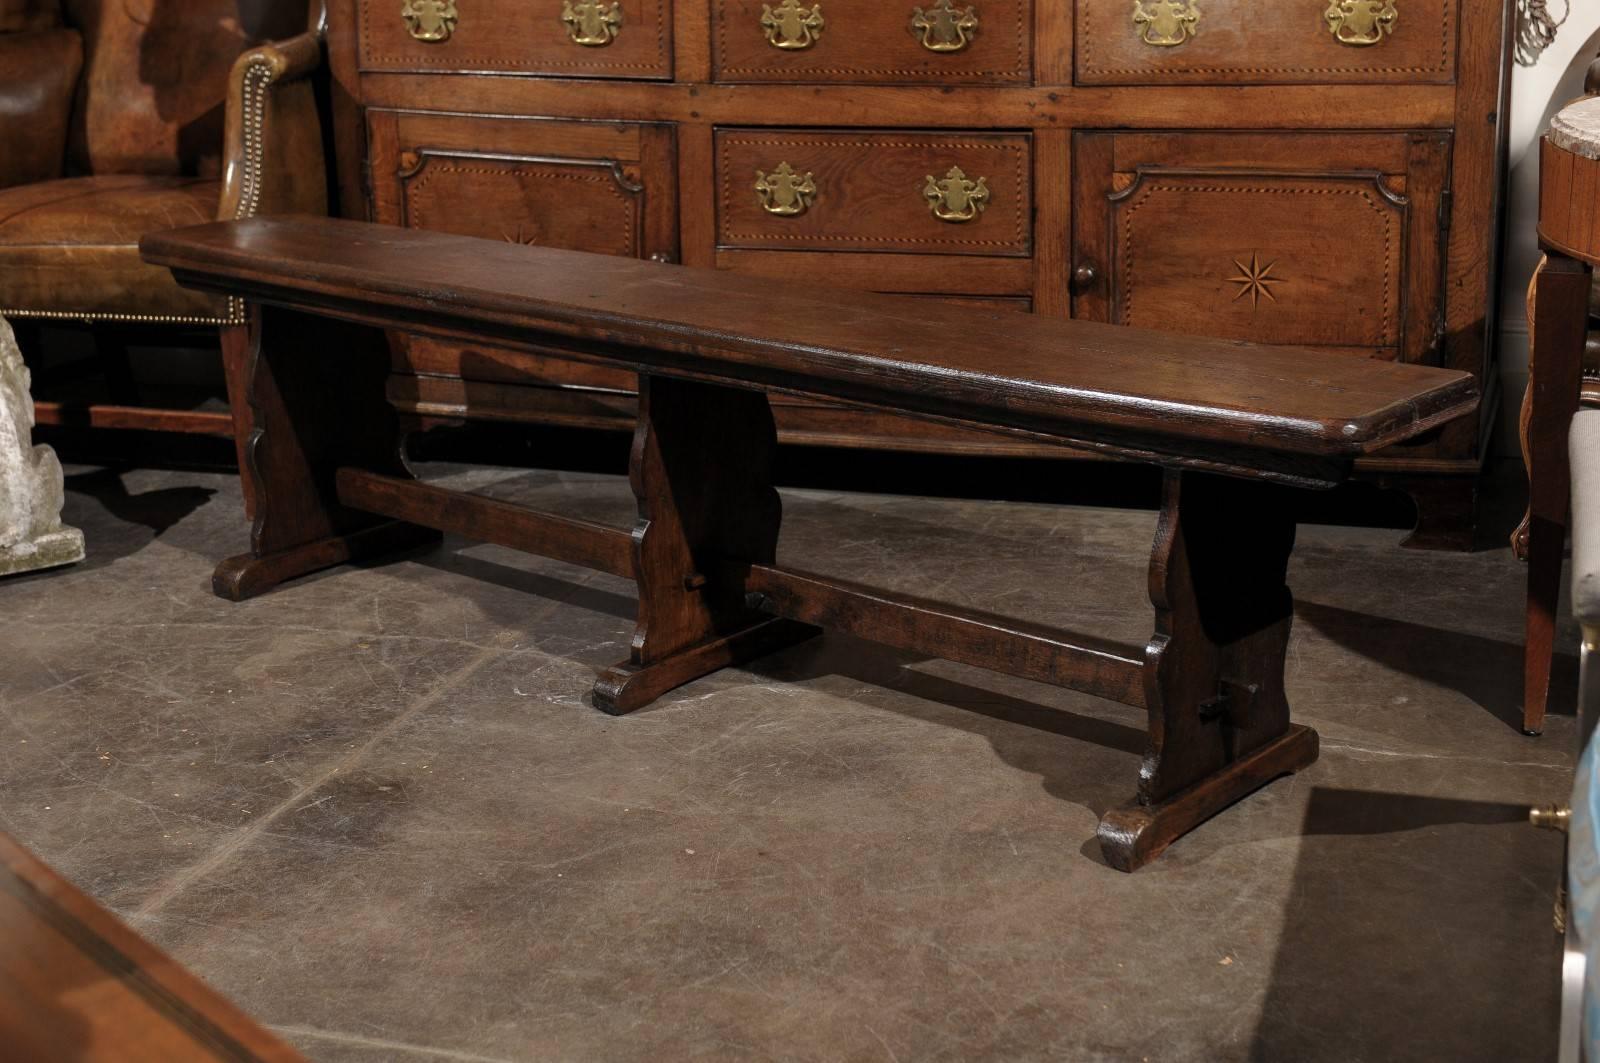 A 19th century long wooden bench with a rectangular molded seat over three trestle crossbow-shaped supports, joined by a straight stretcher protruding from the outer legs, offering numerous convivial sitting places. The rich and dark patina along